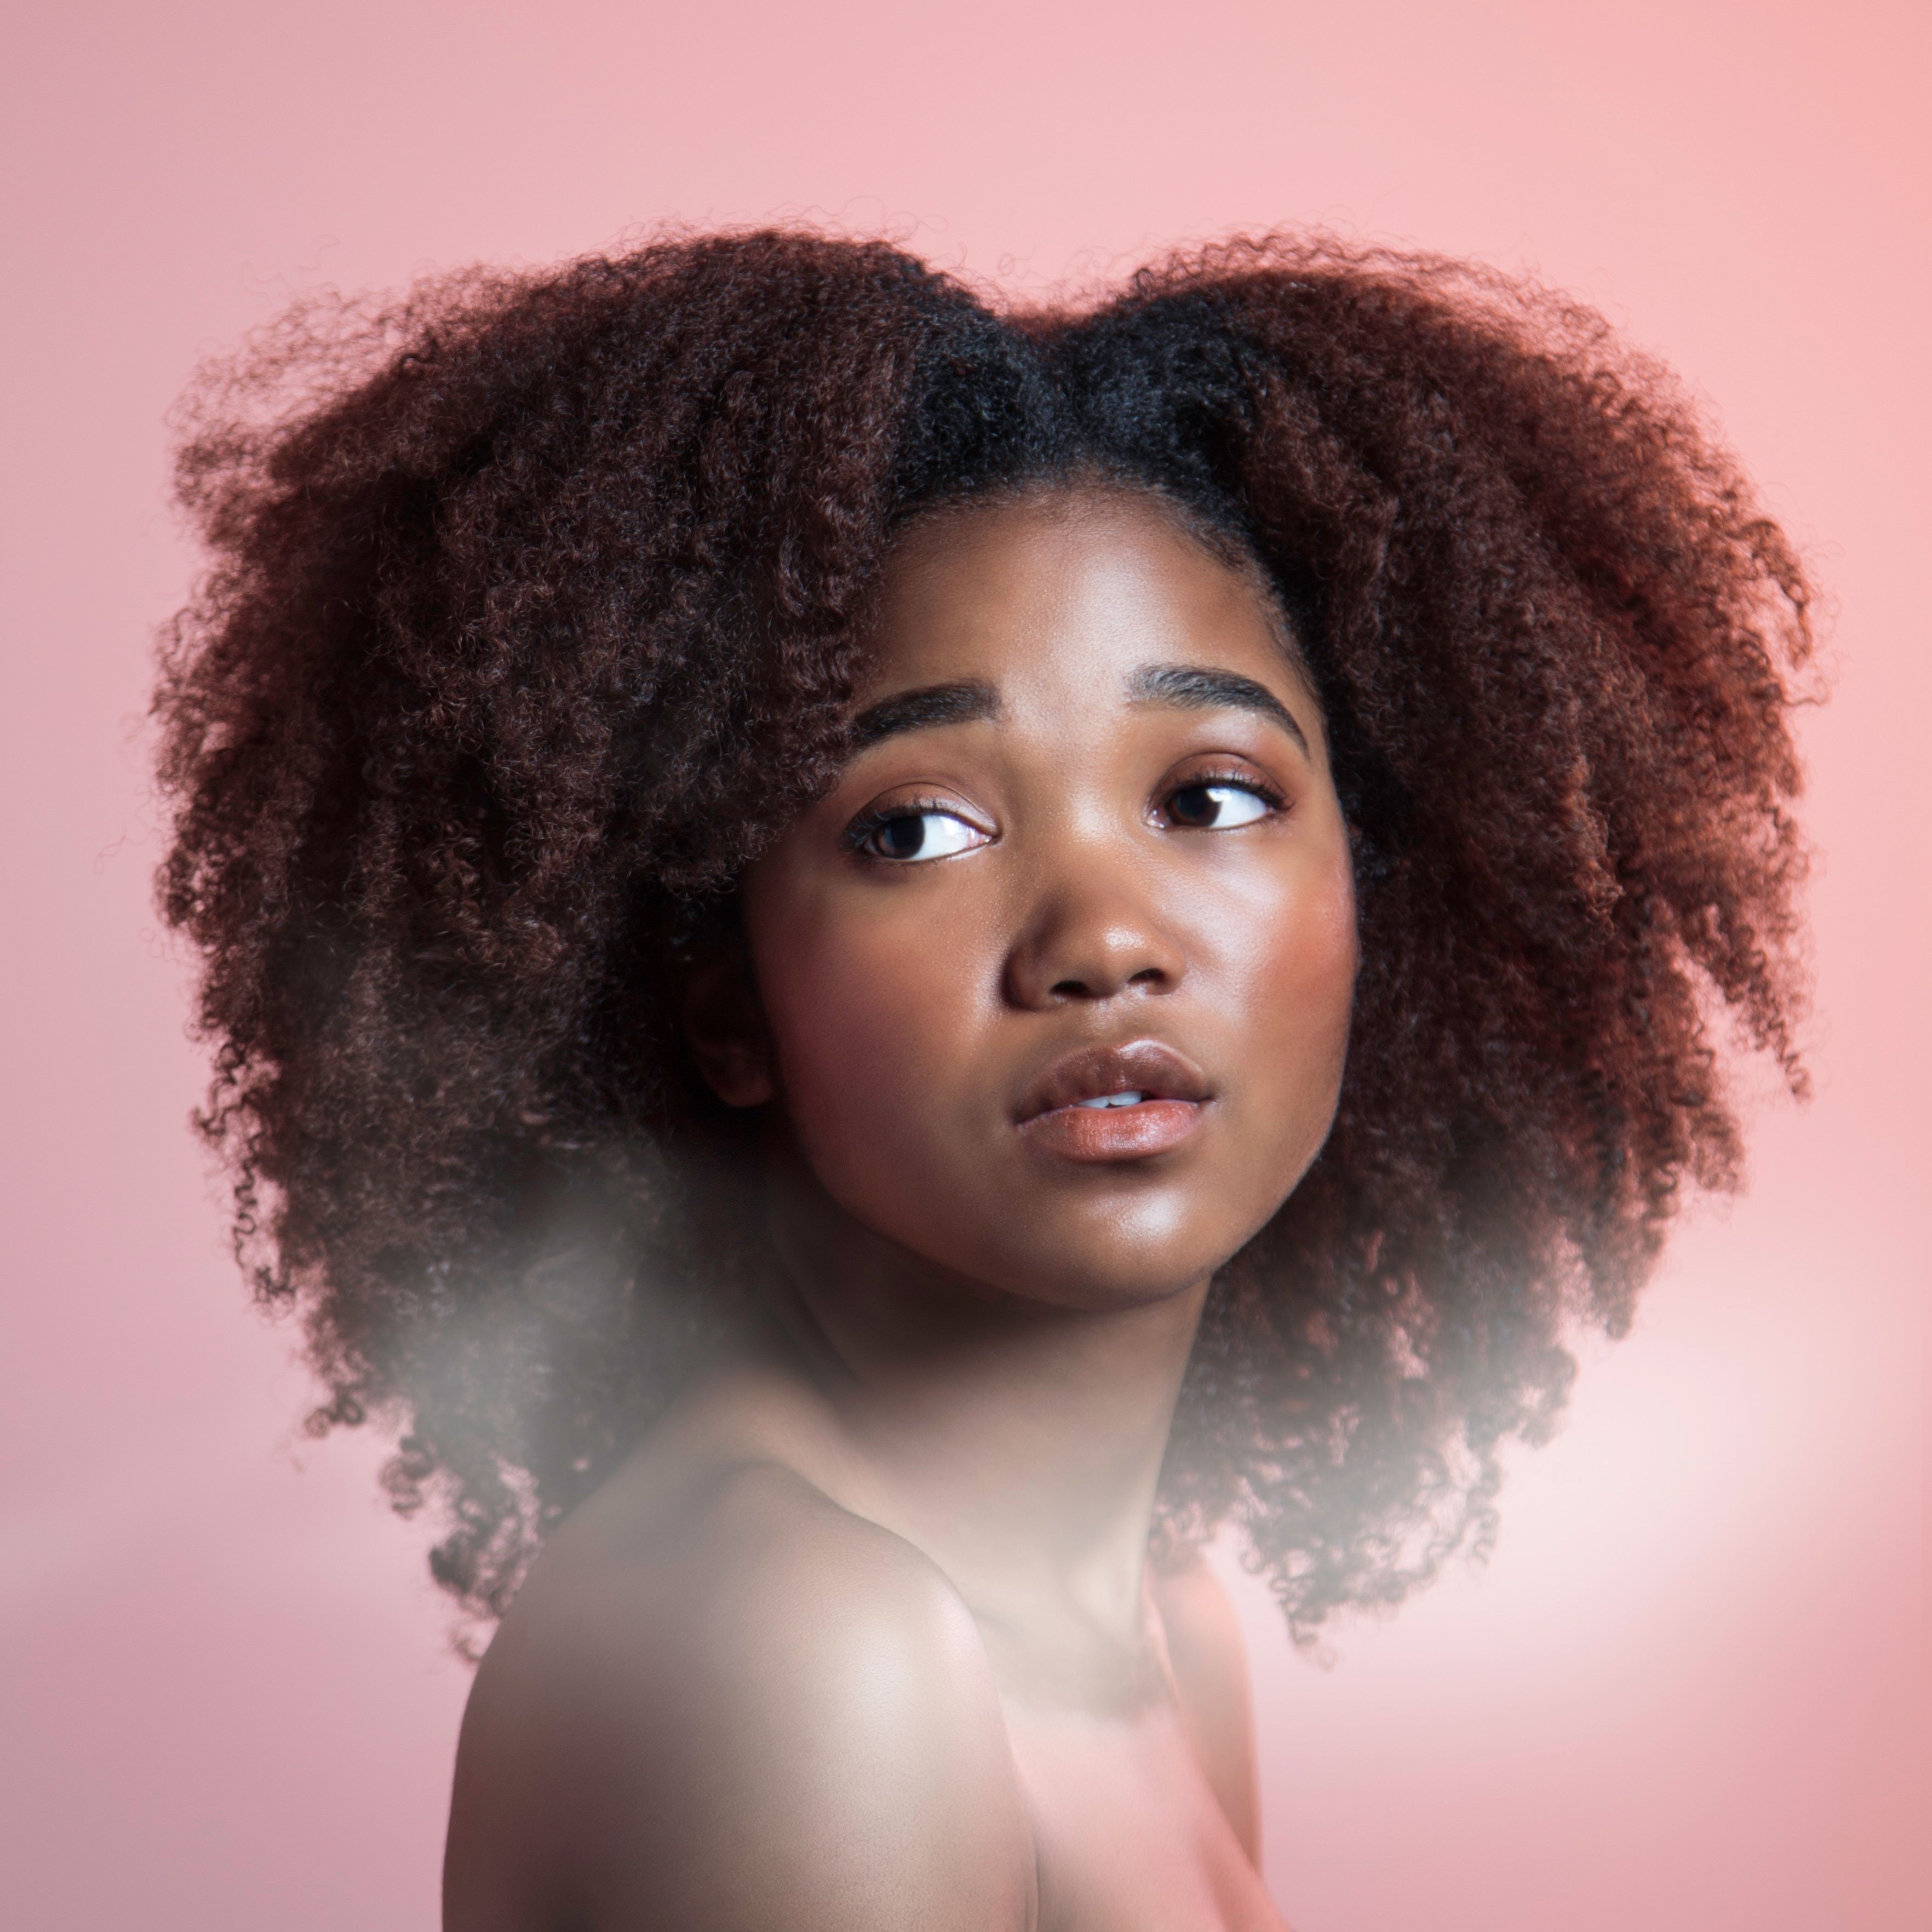 Maintaining An Afro, Blog Articles